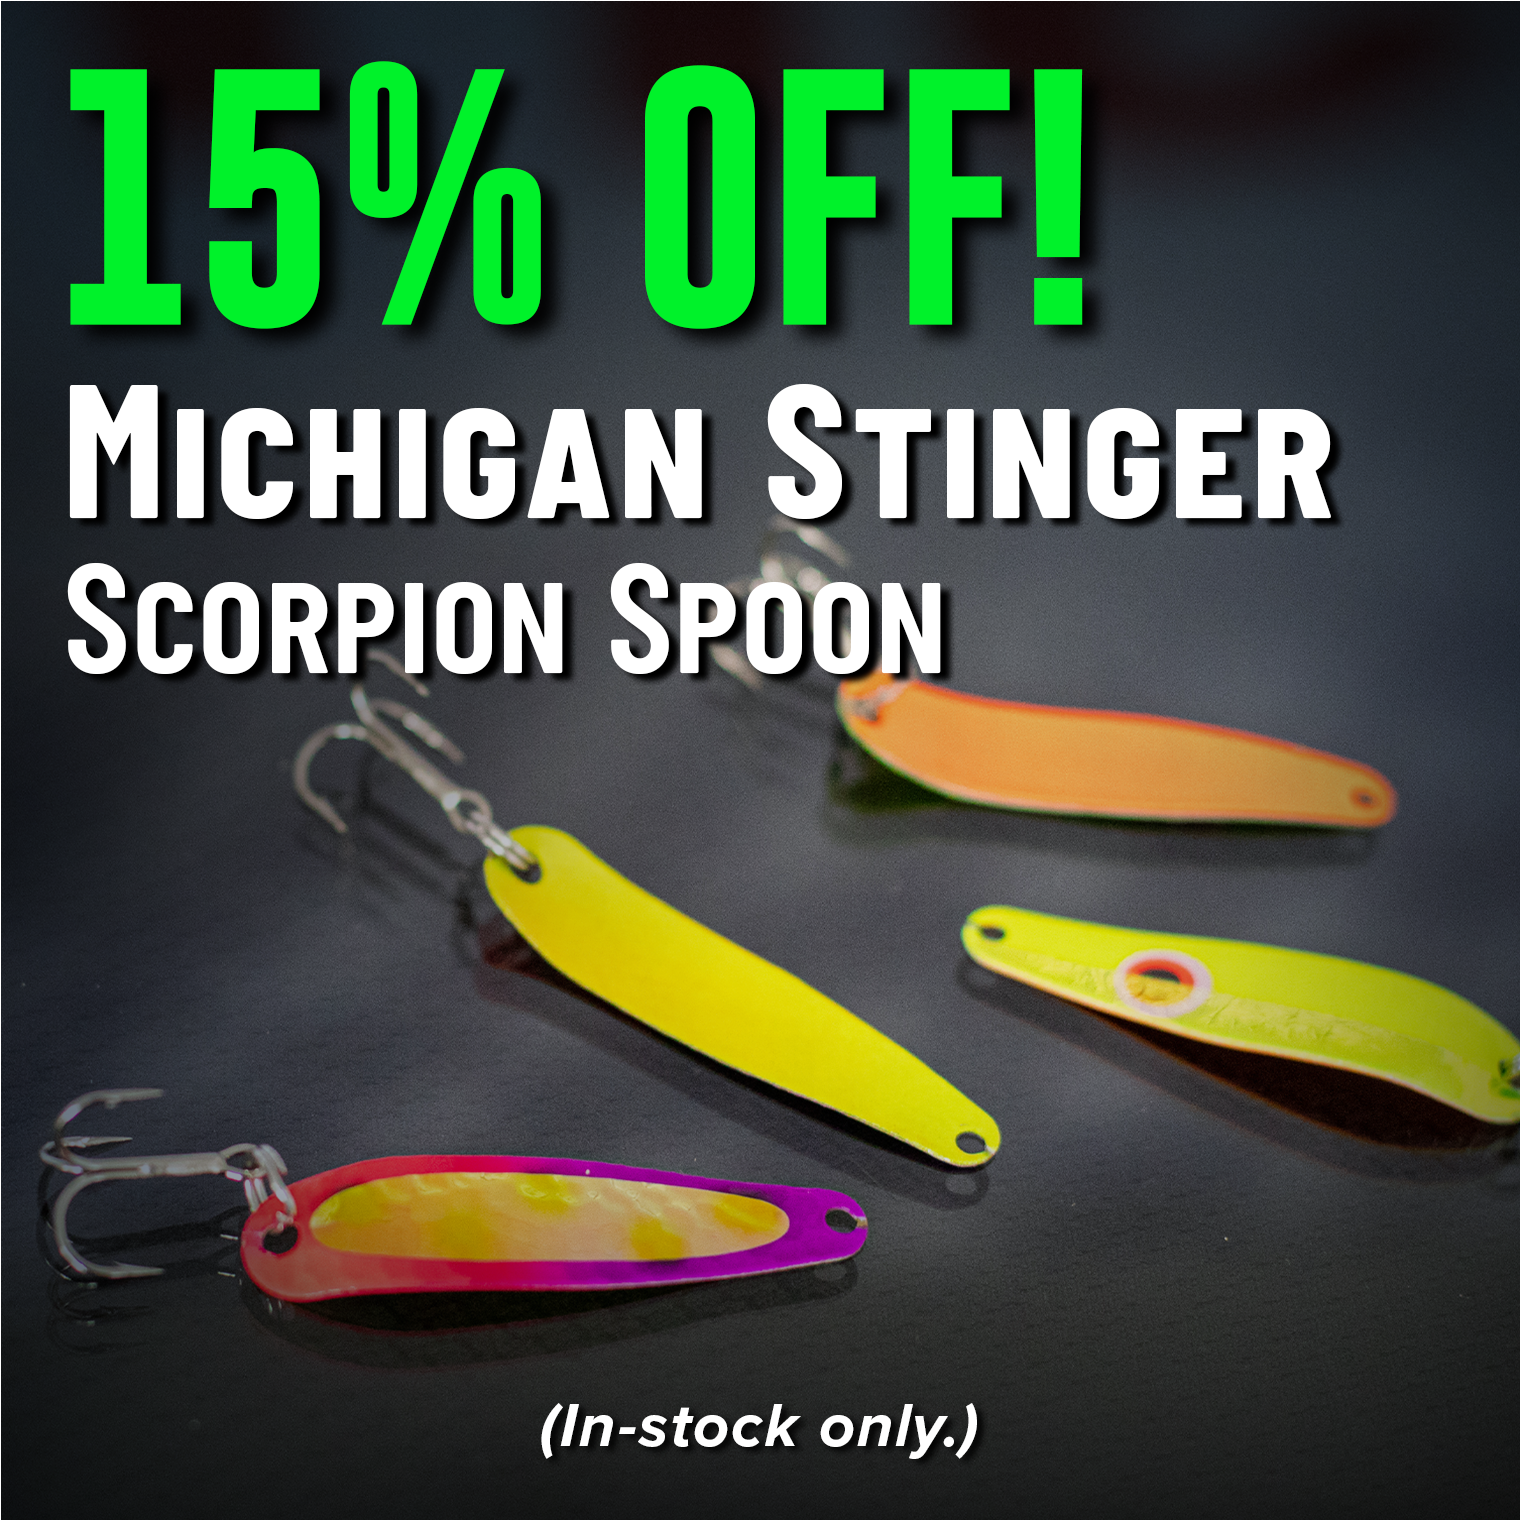 15% Off! Michigan Stinger Scorpion Spoon (In-stock only.)